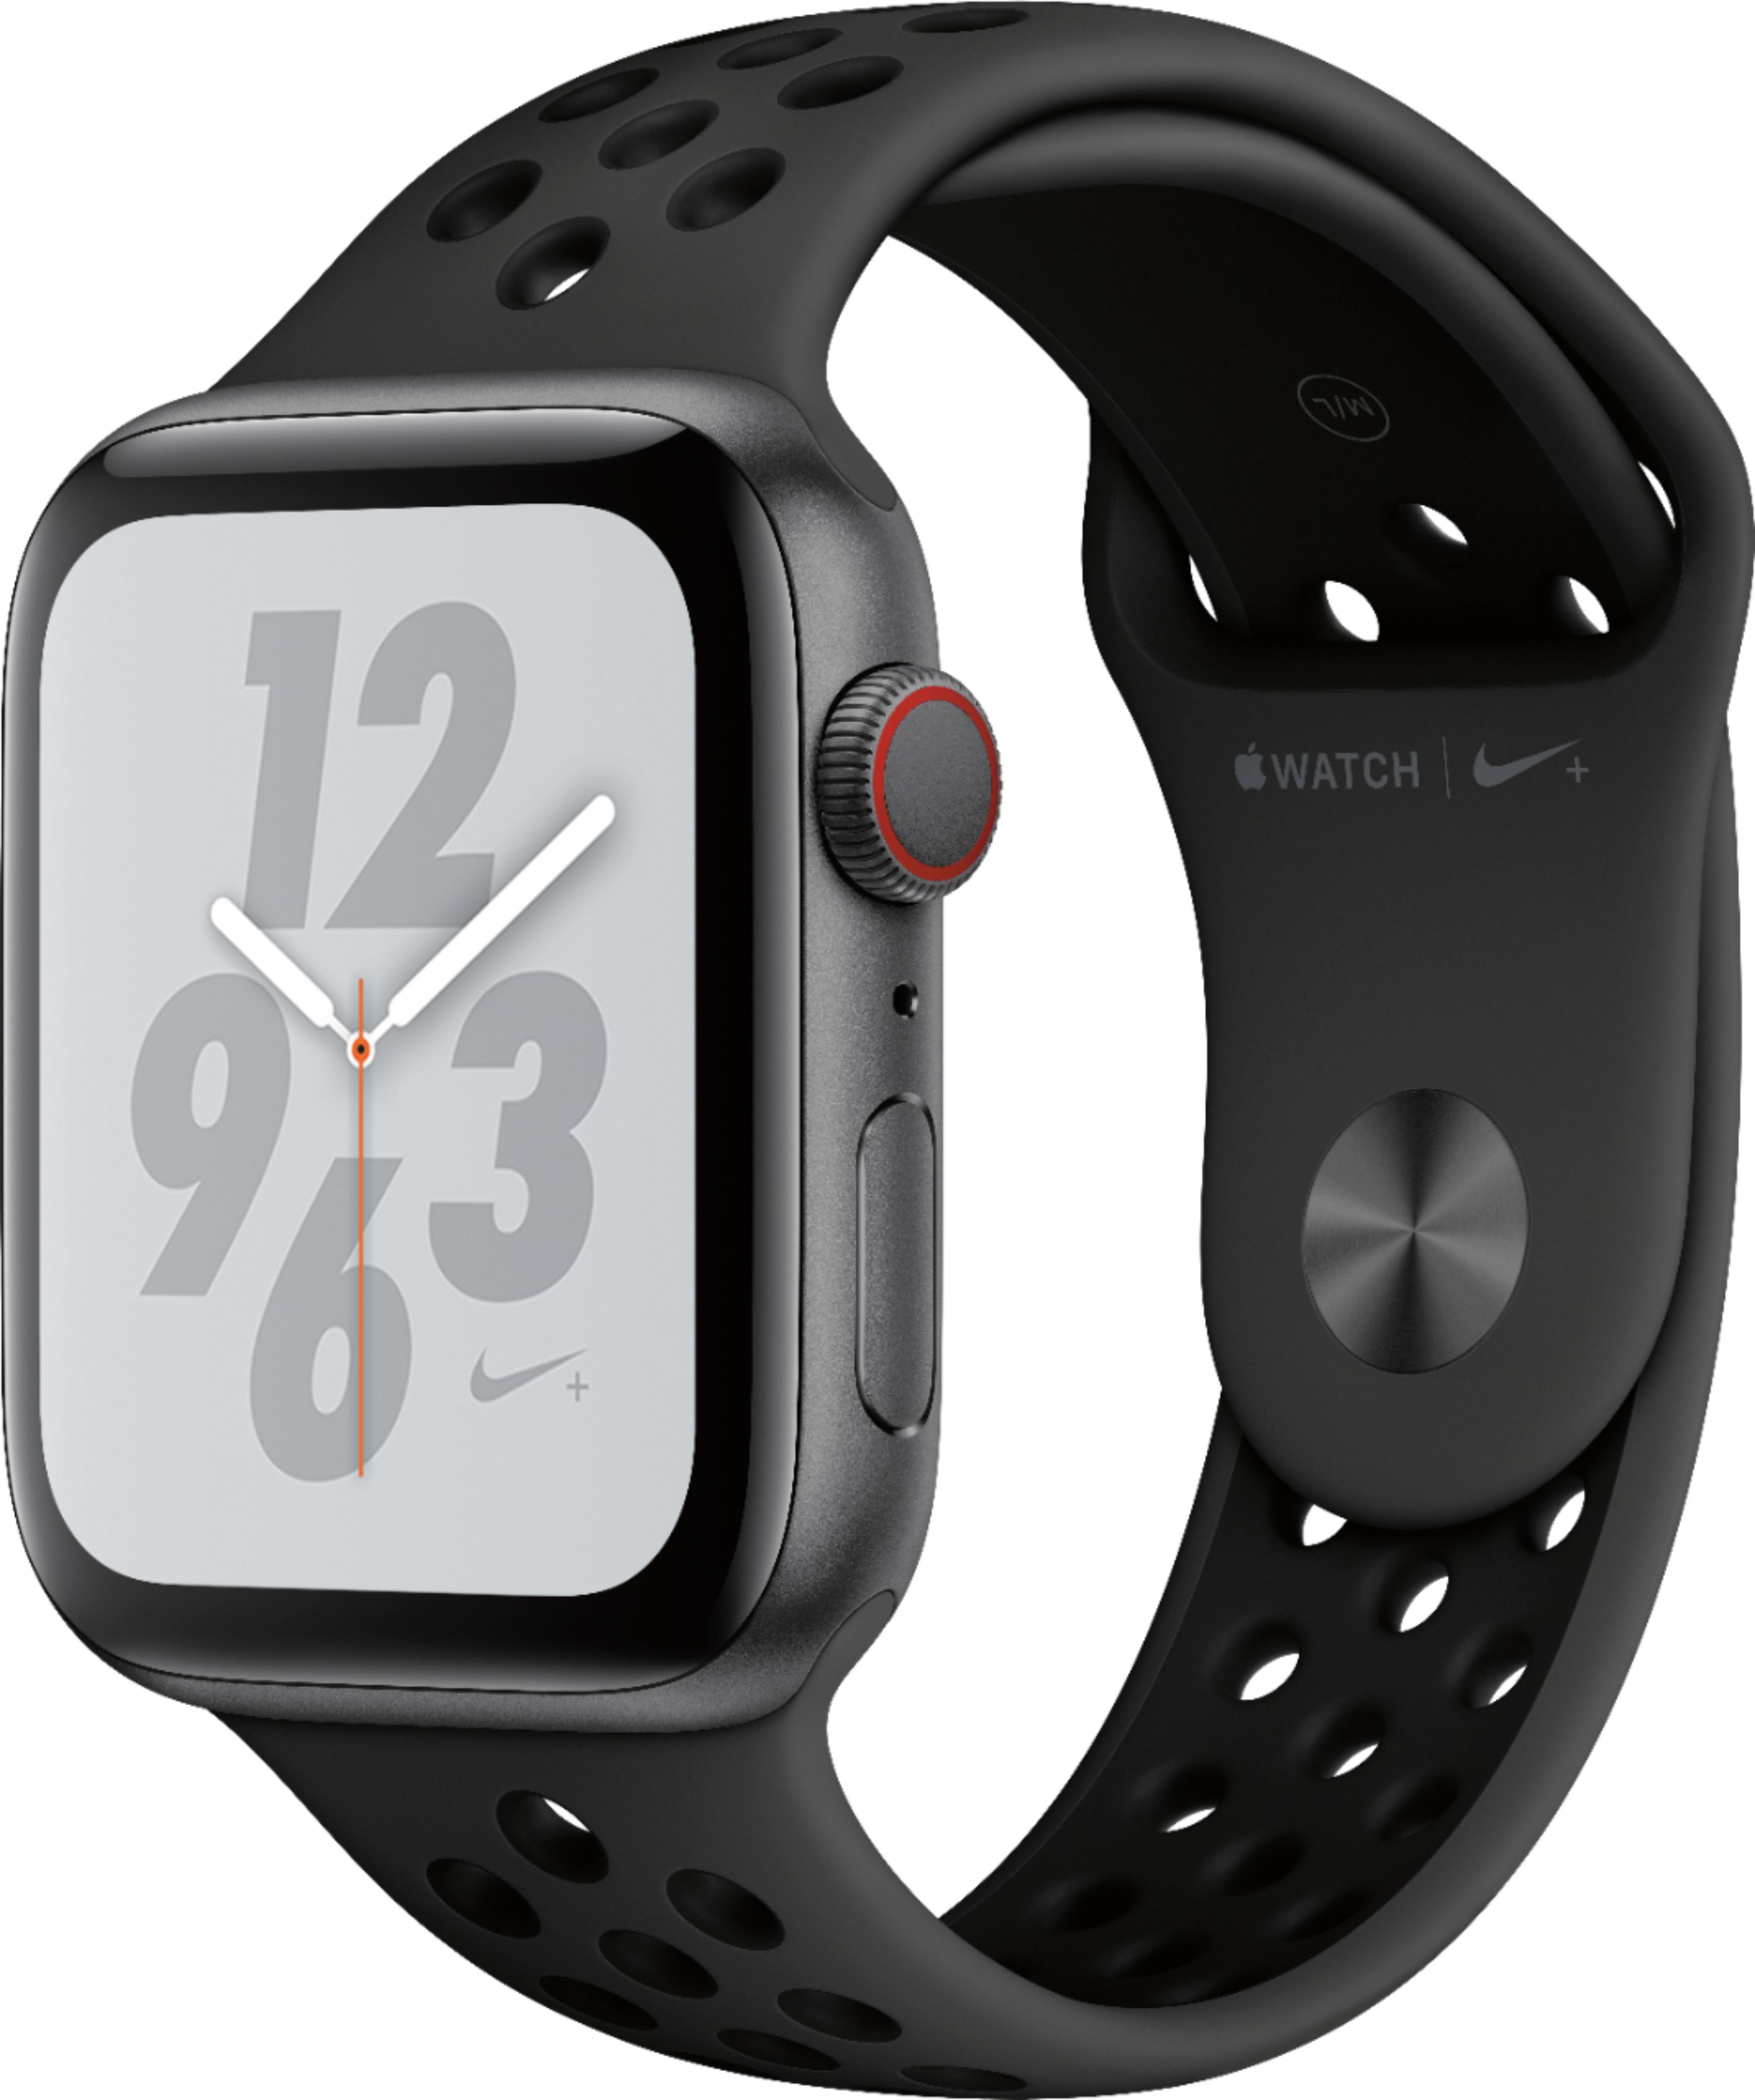 0190198865953 - APPLE WATCH NIKE+ SERIES 4 (GPS + CELLULAR) 44MM SPACE GRAY ALUMINUM CASE WITH ANTHRACITE/BLACK NIKE SPORT BAND - SPACE GRAY ALUMINUM